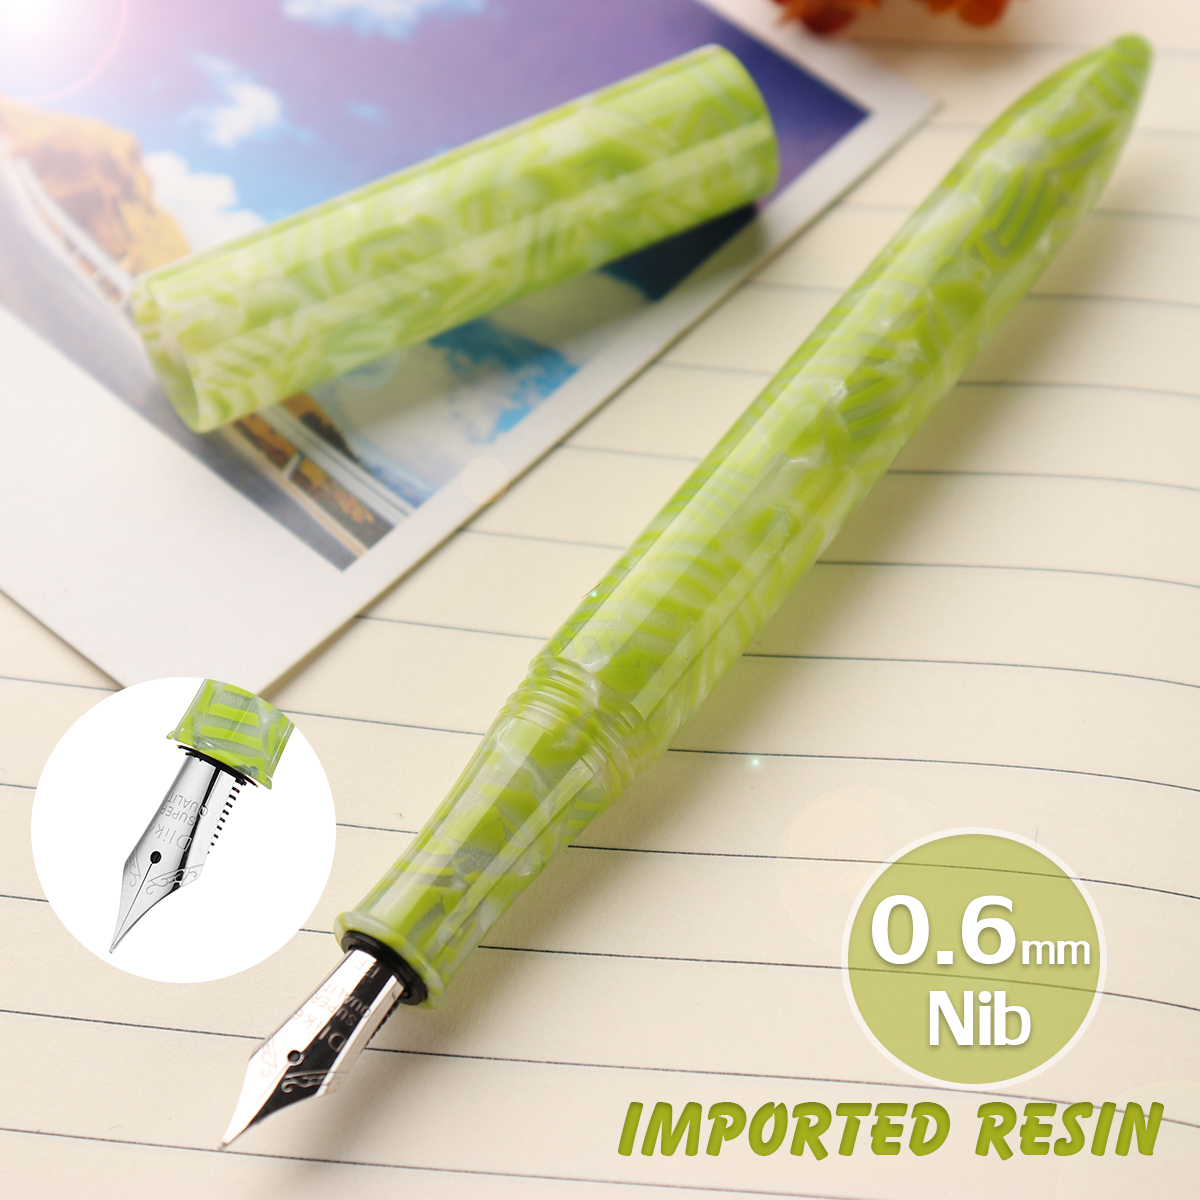 Delike-06mm-Nib-Resin-Fountain-Pen-Rotating-Ink-Calligraphy-Writing-With-Box-For-Office-School-1303281-3